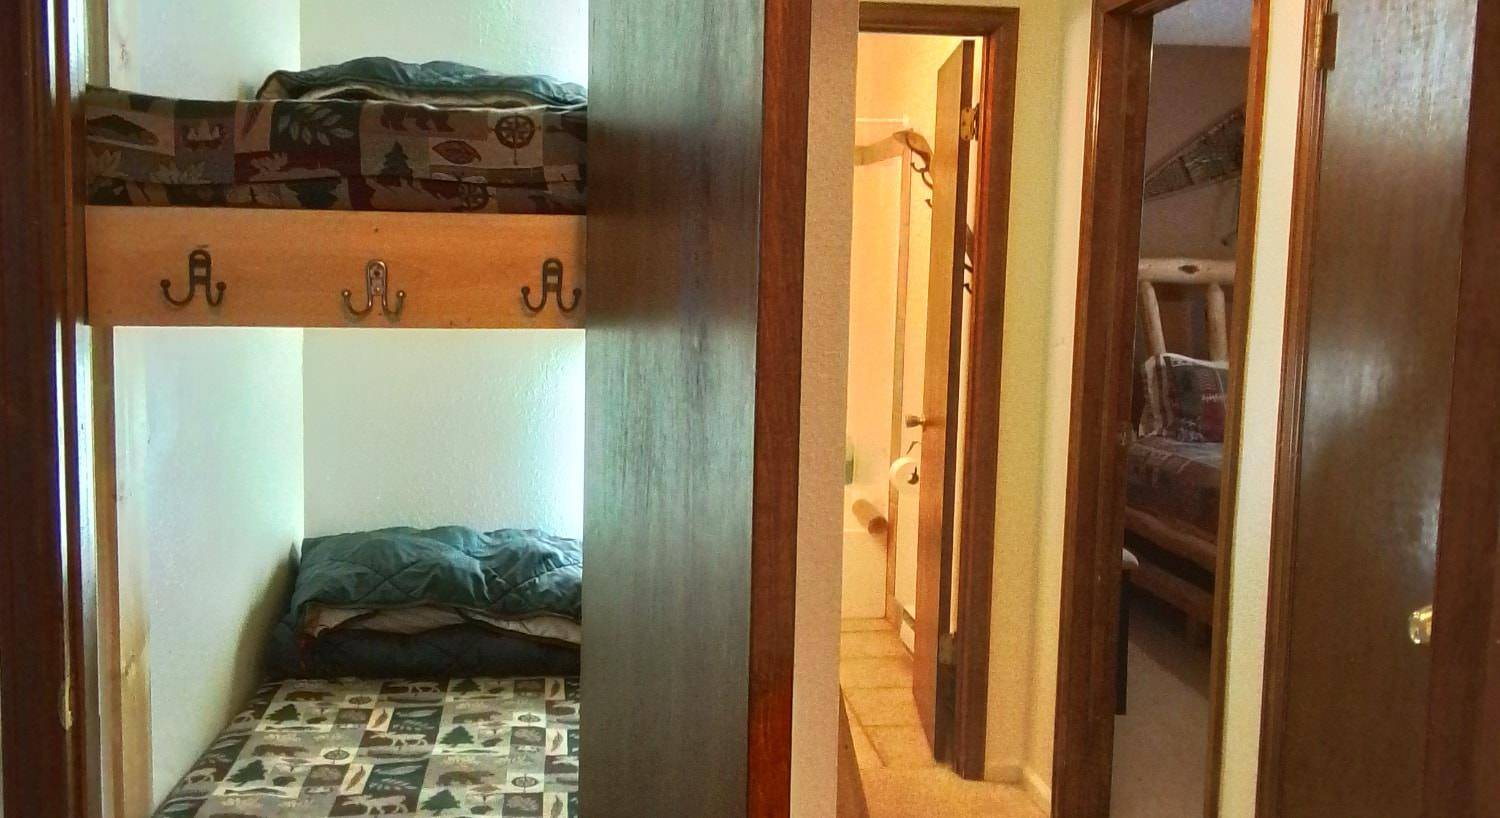 On the left, wooden bunk beds, in the middle, view into a bathroom with stand up shower, on the right, view into bedroom with brown walls, carpeting and wooden log bed